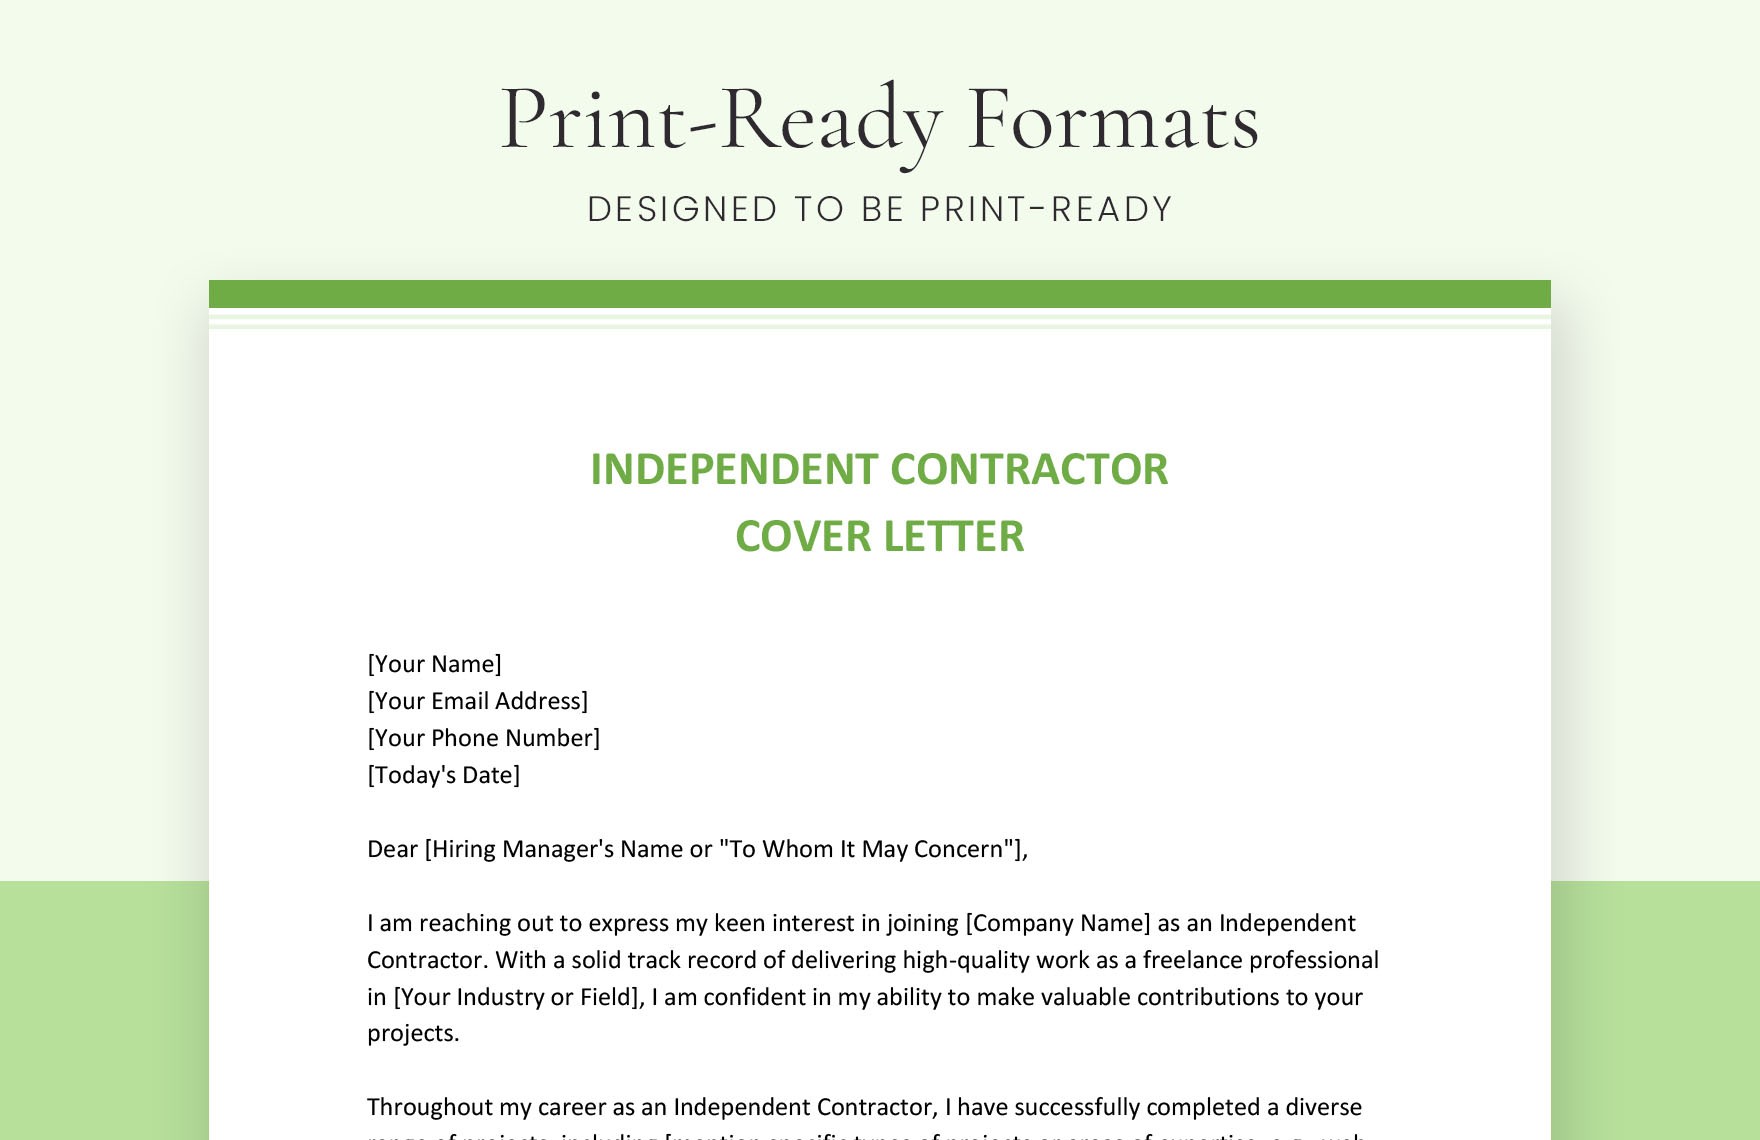 Independent Contractor Cover Letter